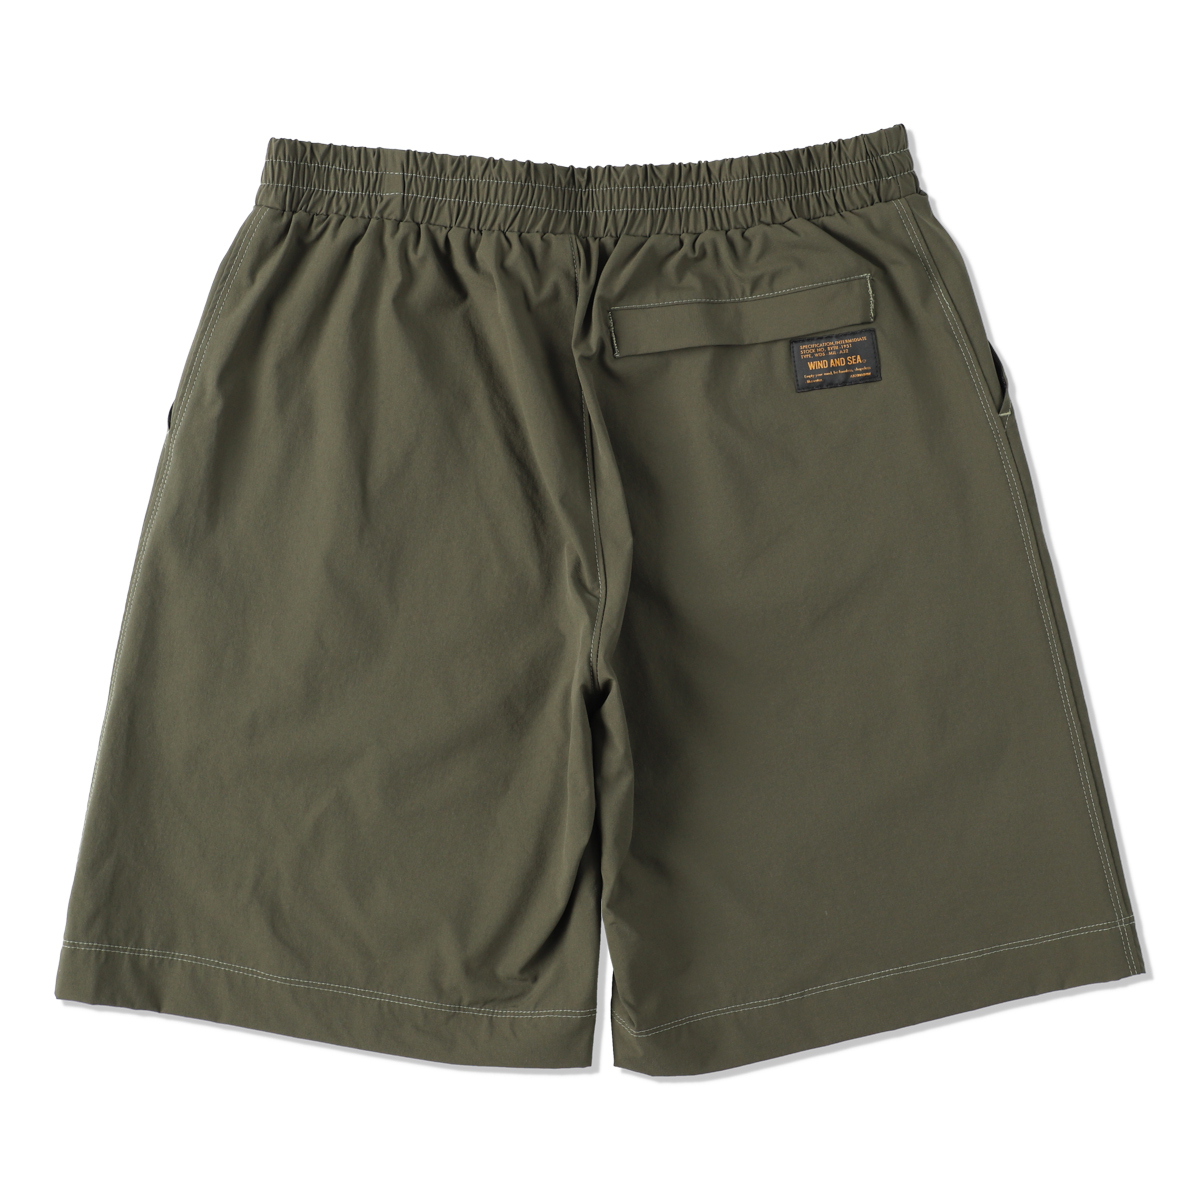 WIND AND SEA MILITARY SURPLUS SHORTPANTS